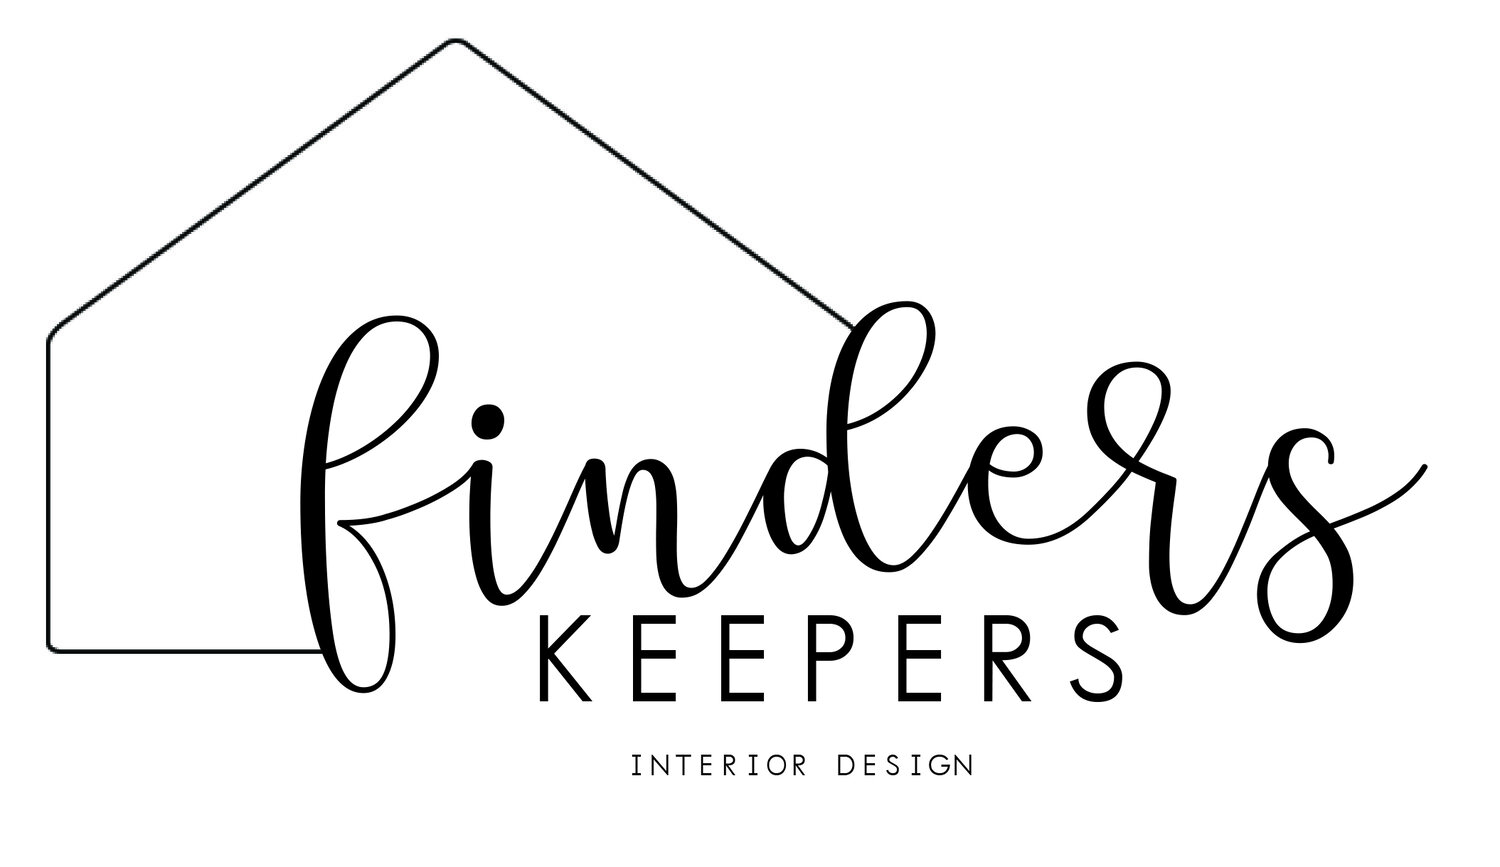 Finders Keepers Interior Design